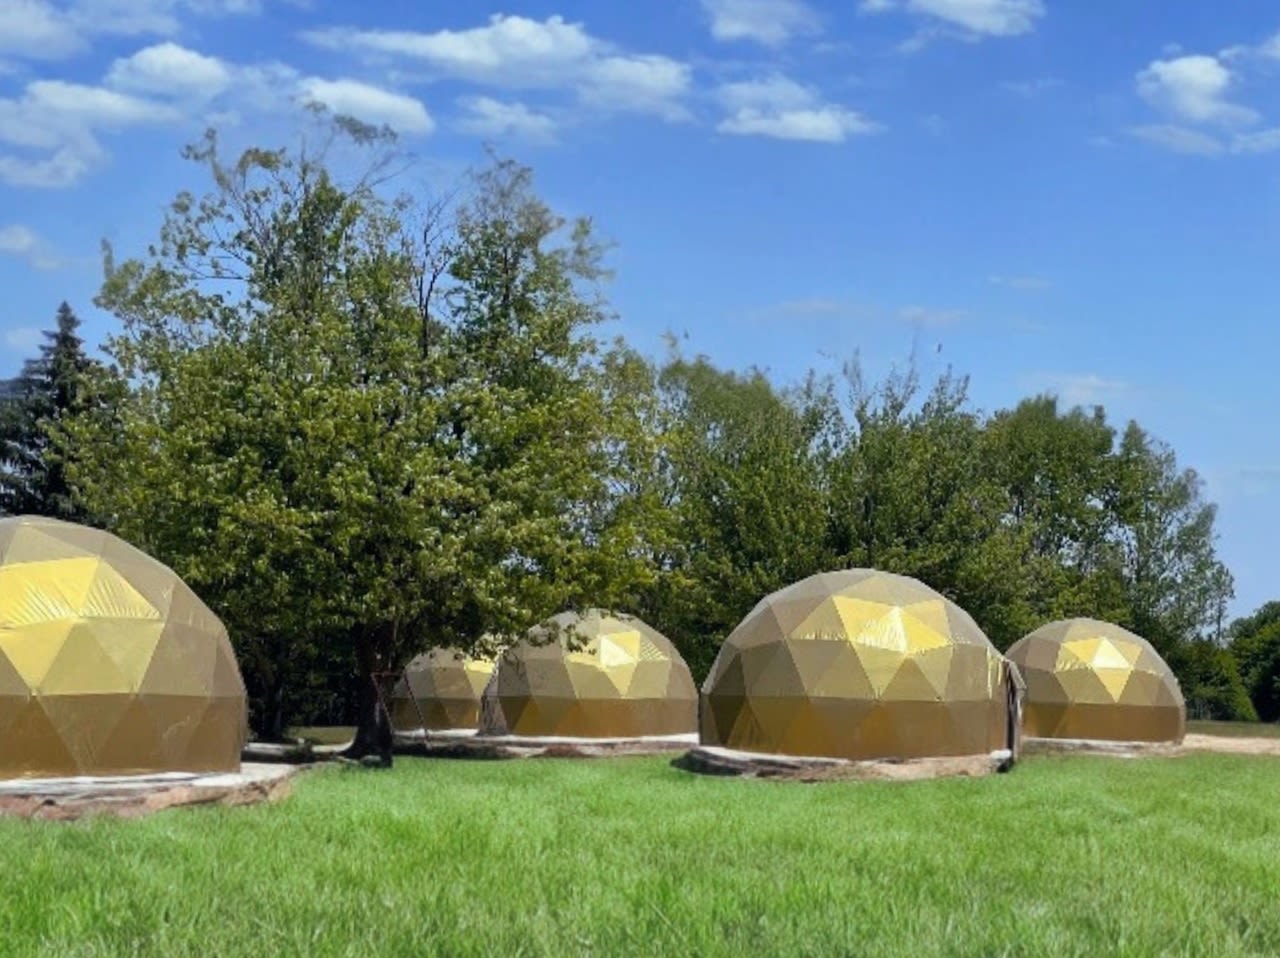 Glamping in a ‘disco dome’? Geodesic dome resort to open near Lake Michigan